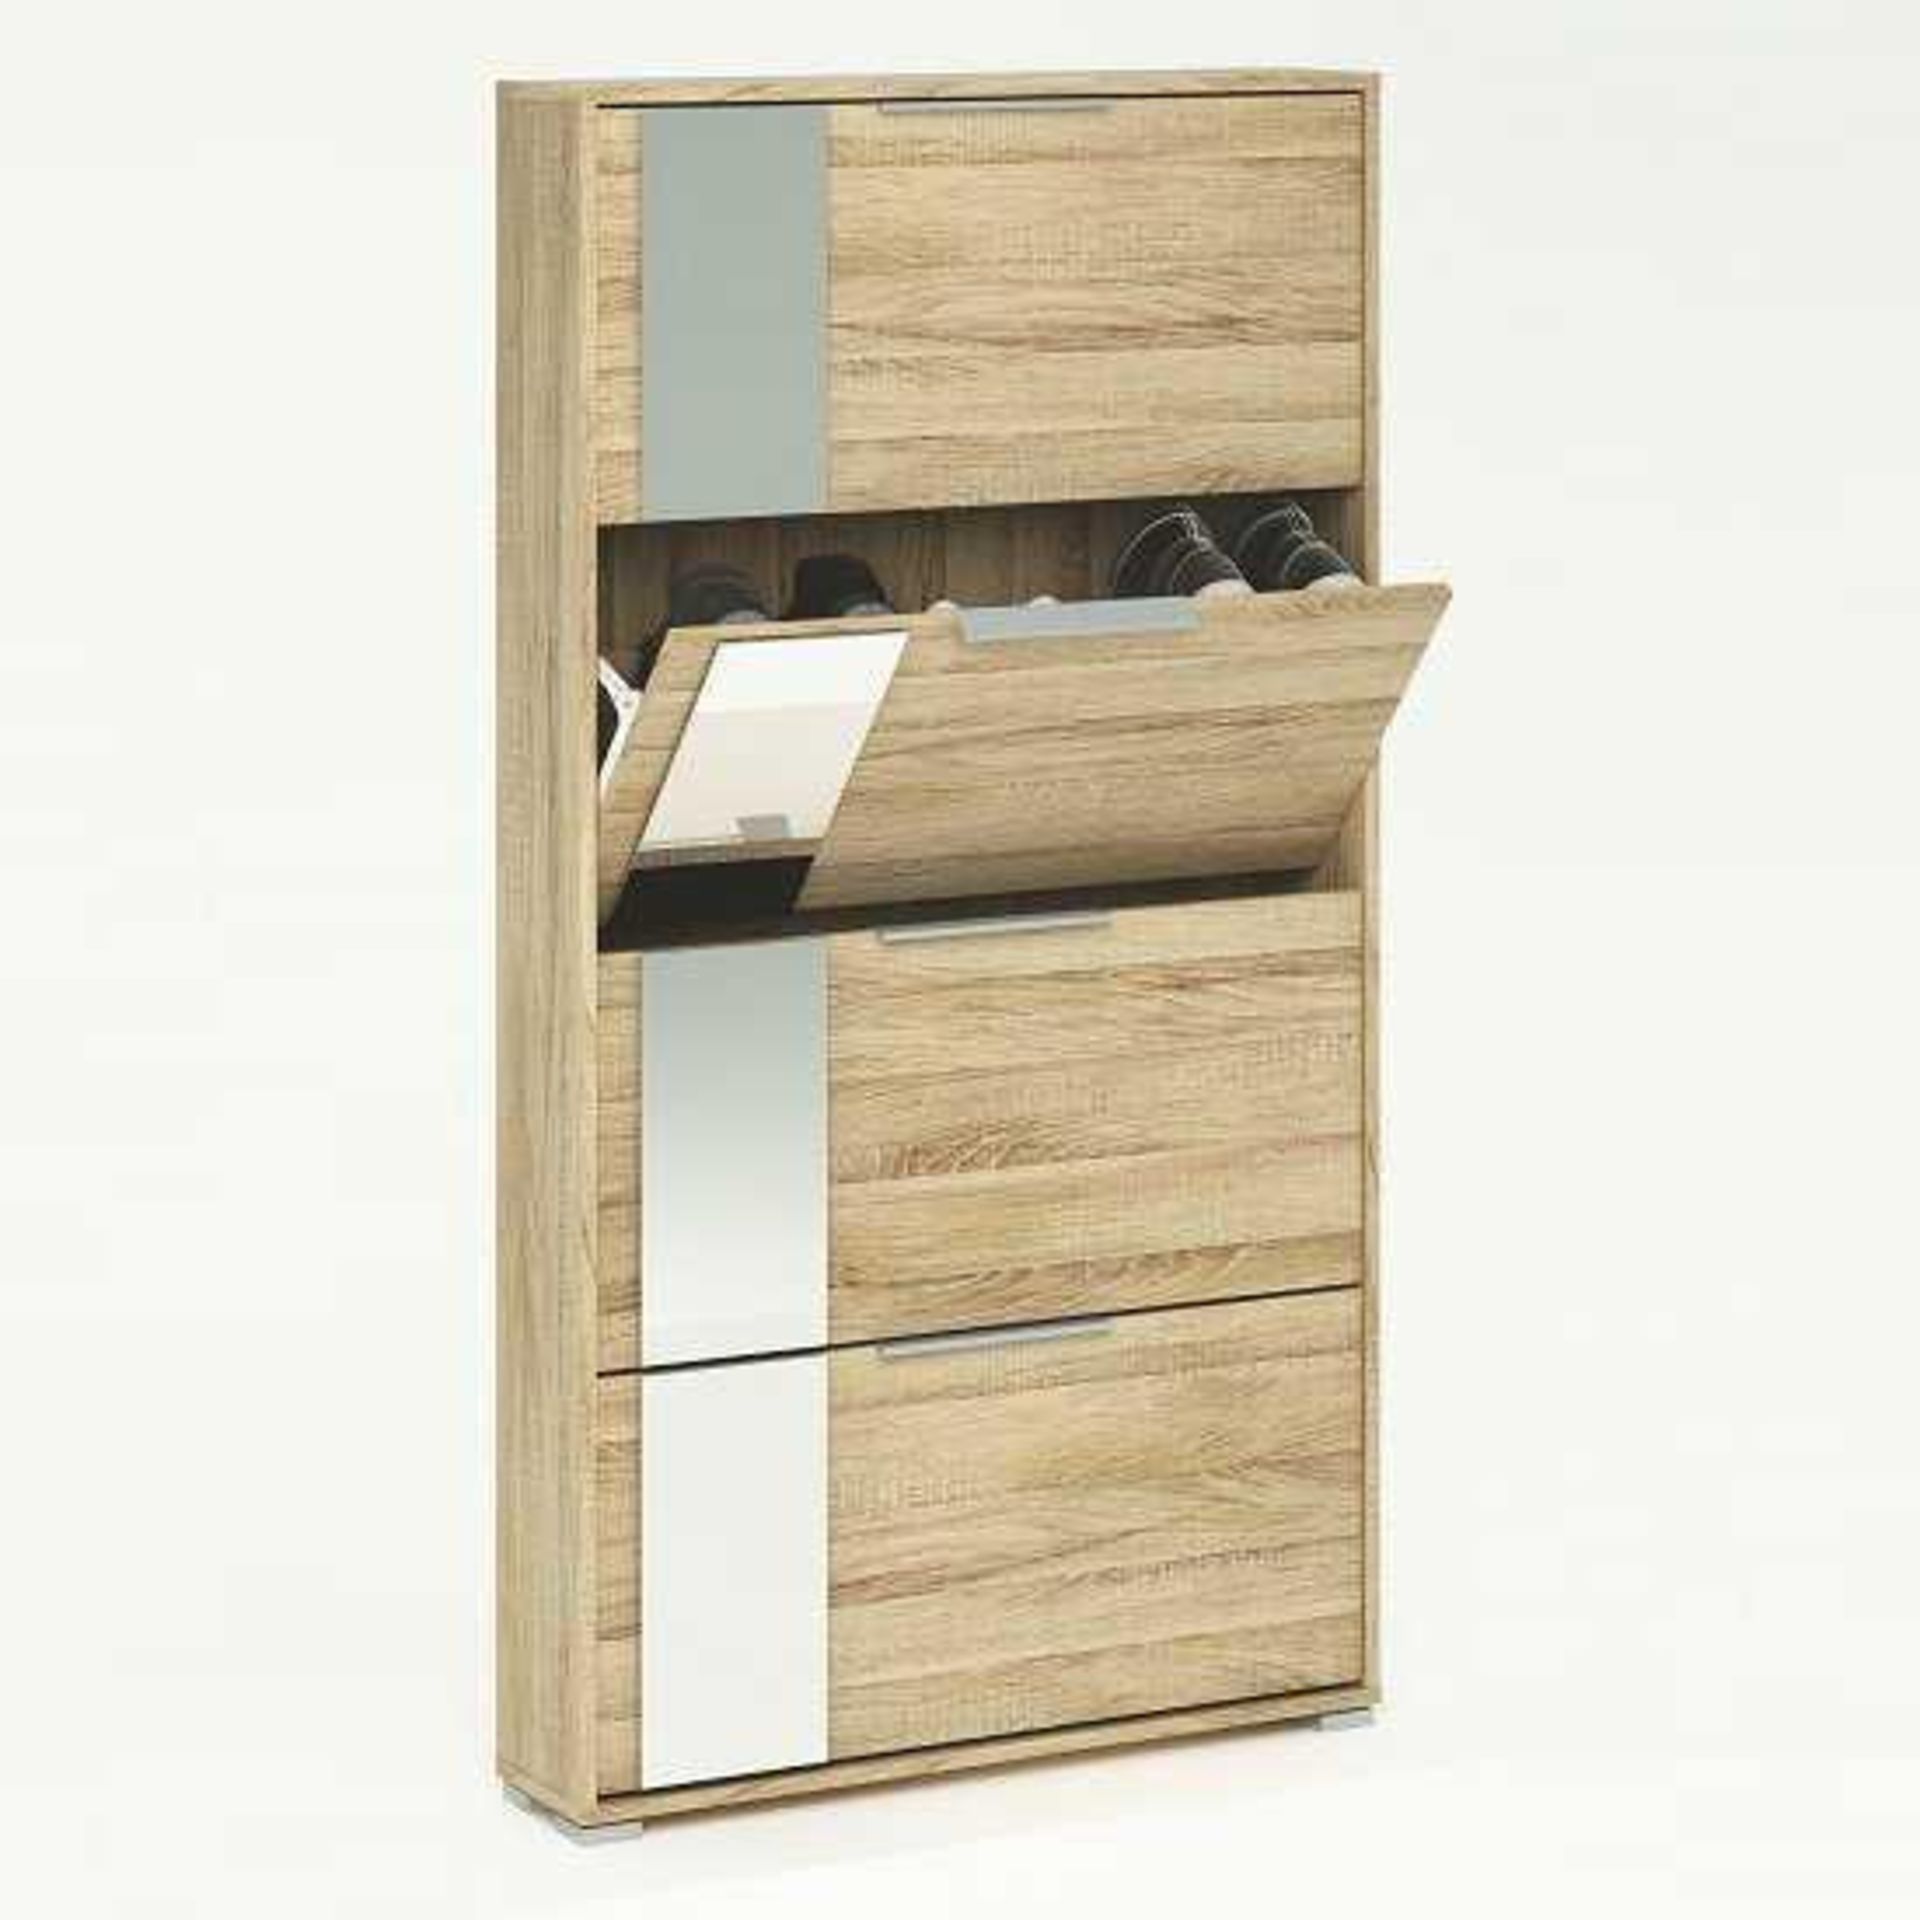 (Db) RRP £170 Lot To Contain One Boxed Rosana Mirrored Shoe Cabinet In Brushed Oak With 4 Flap Door